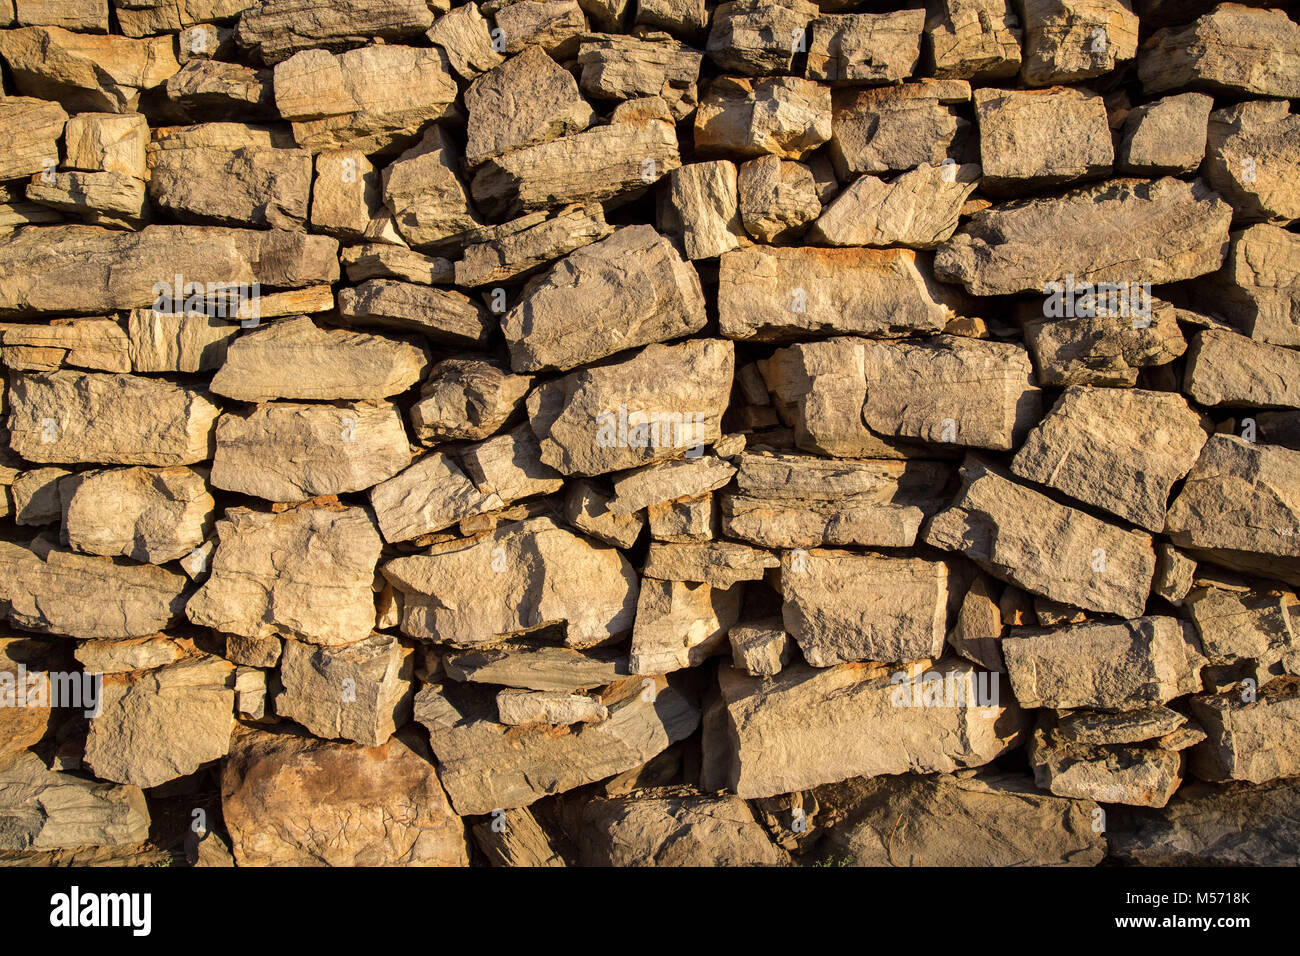 Dry-packed stone wall Stock Photo